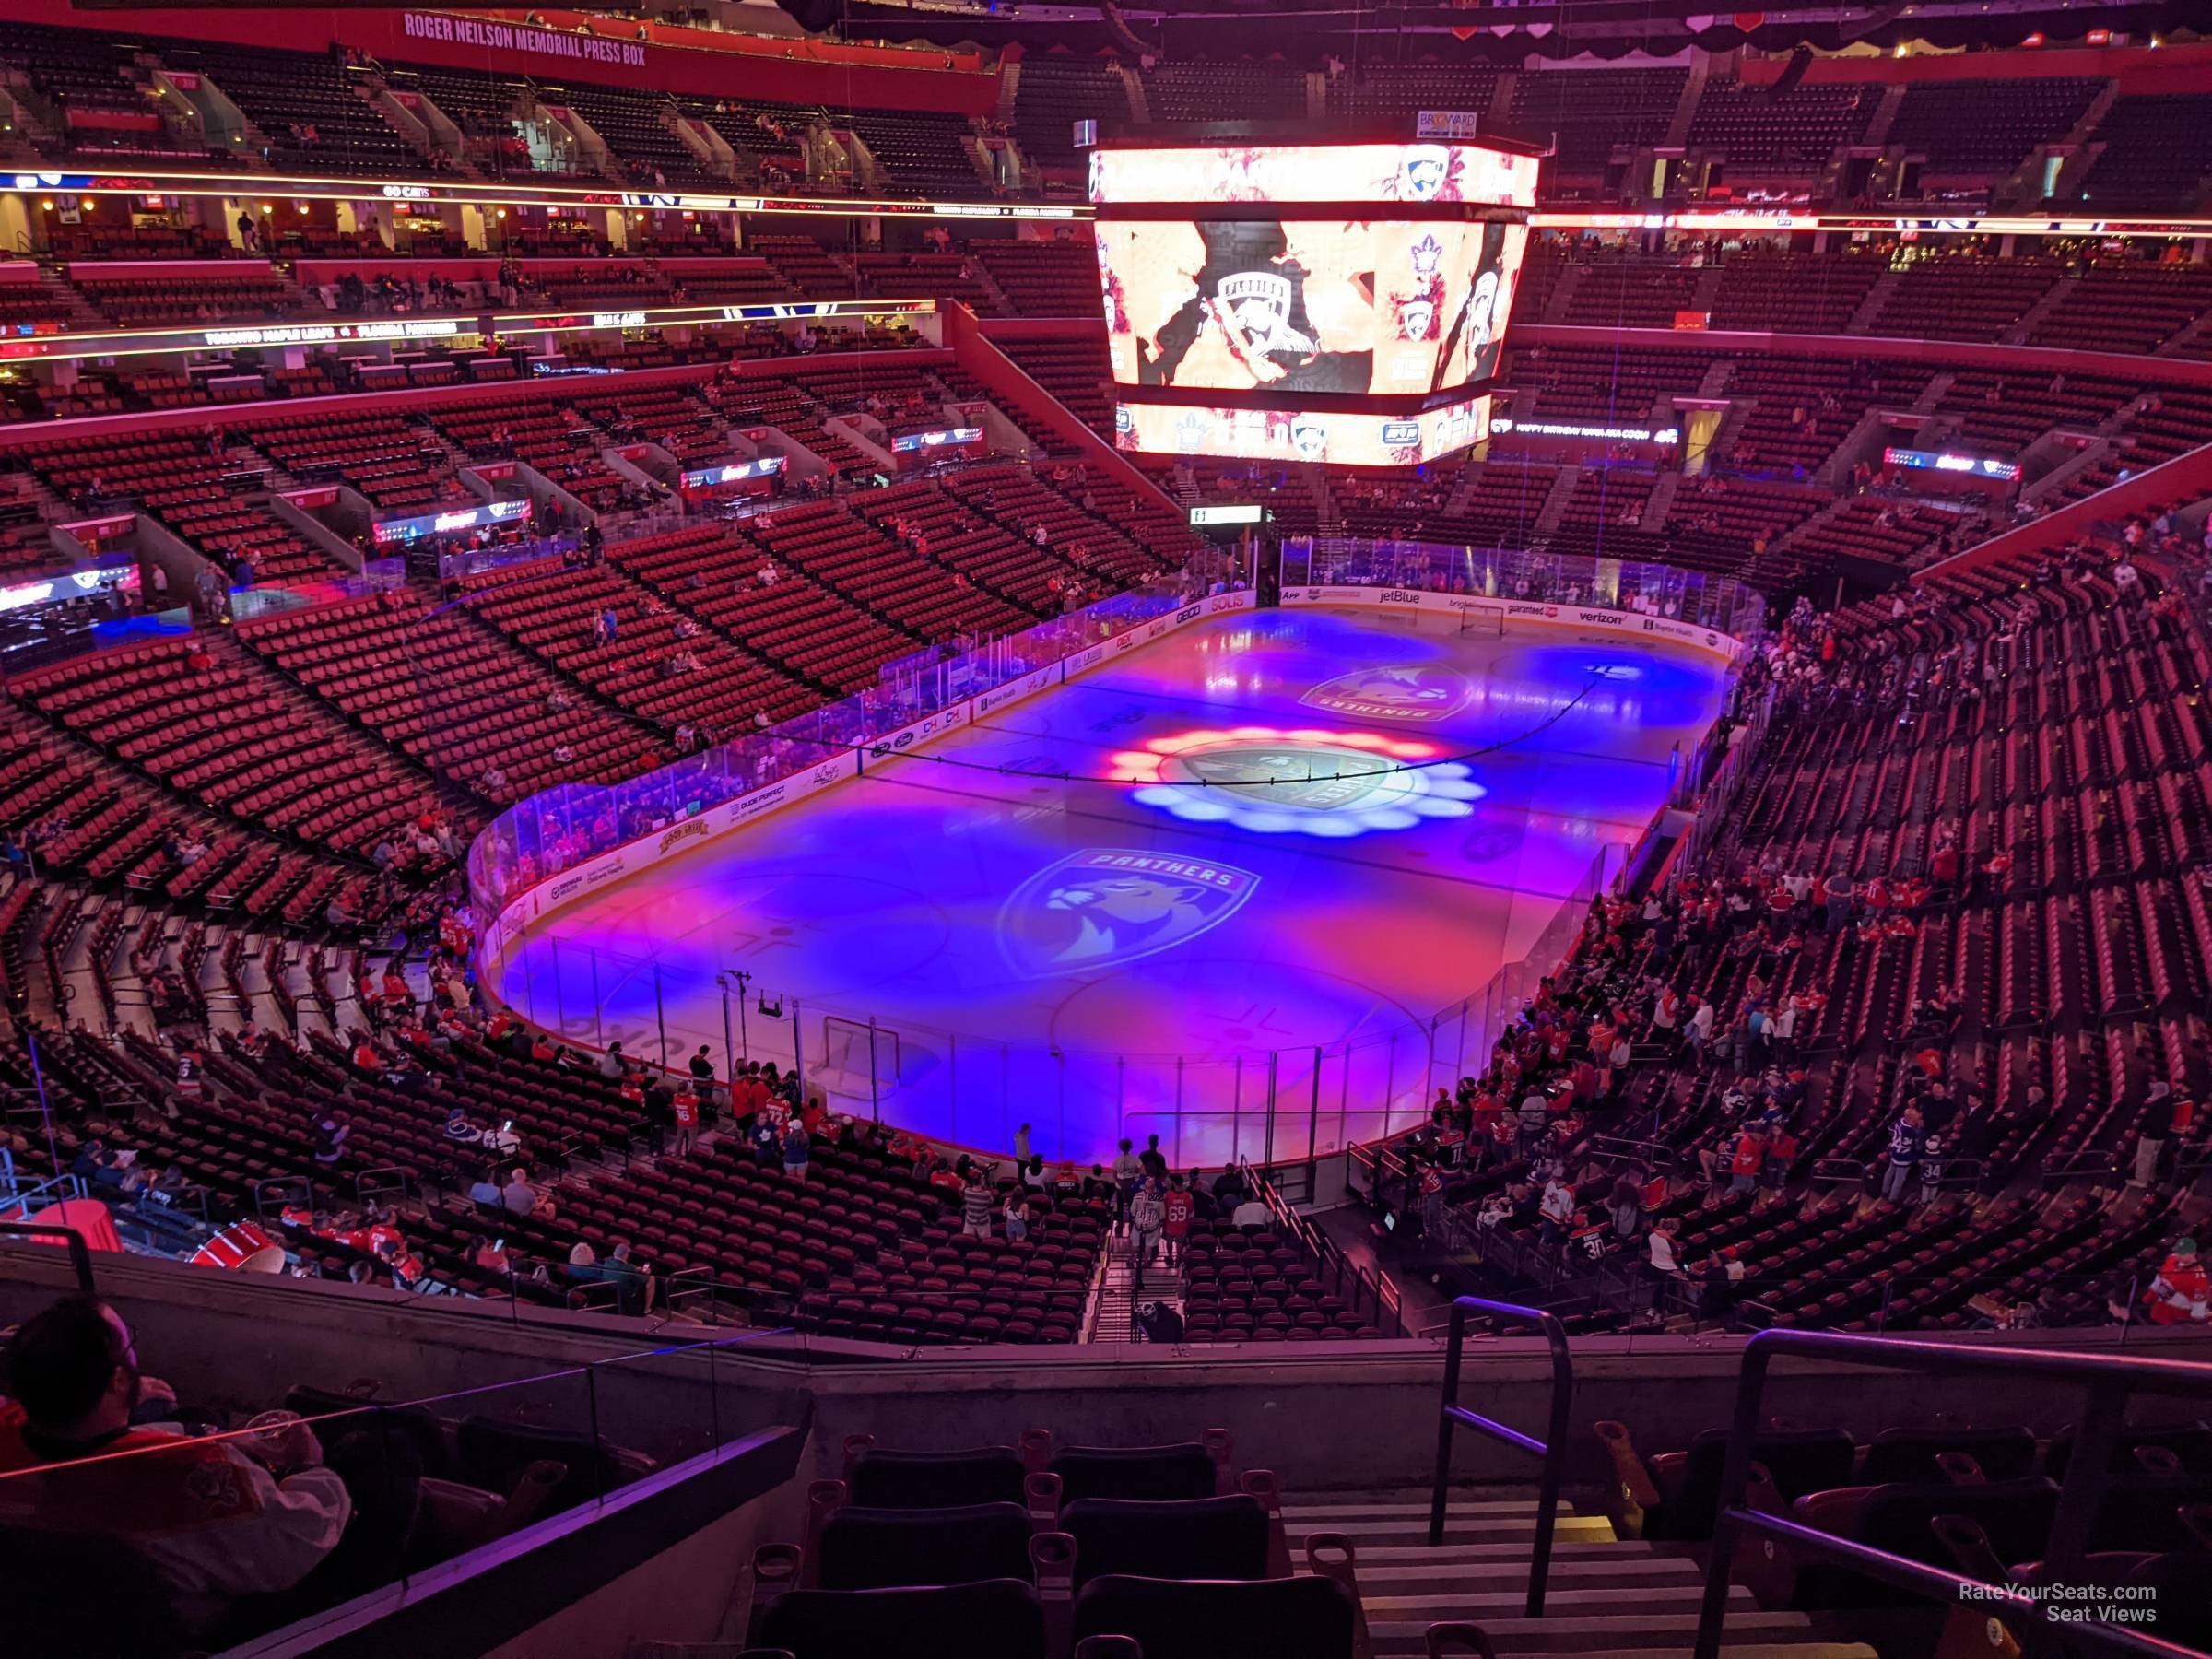 Seat View for Amerant Bank Arena Club C7, Row 6